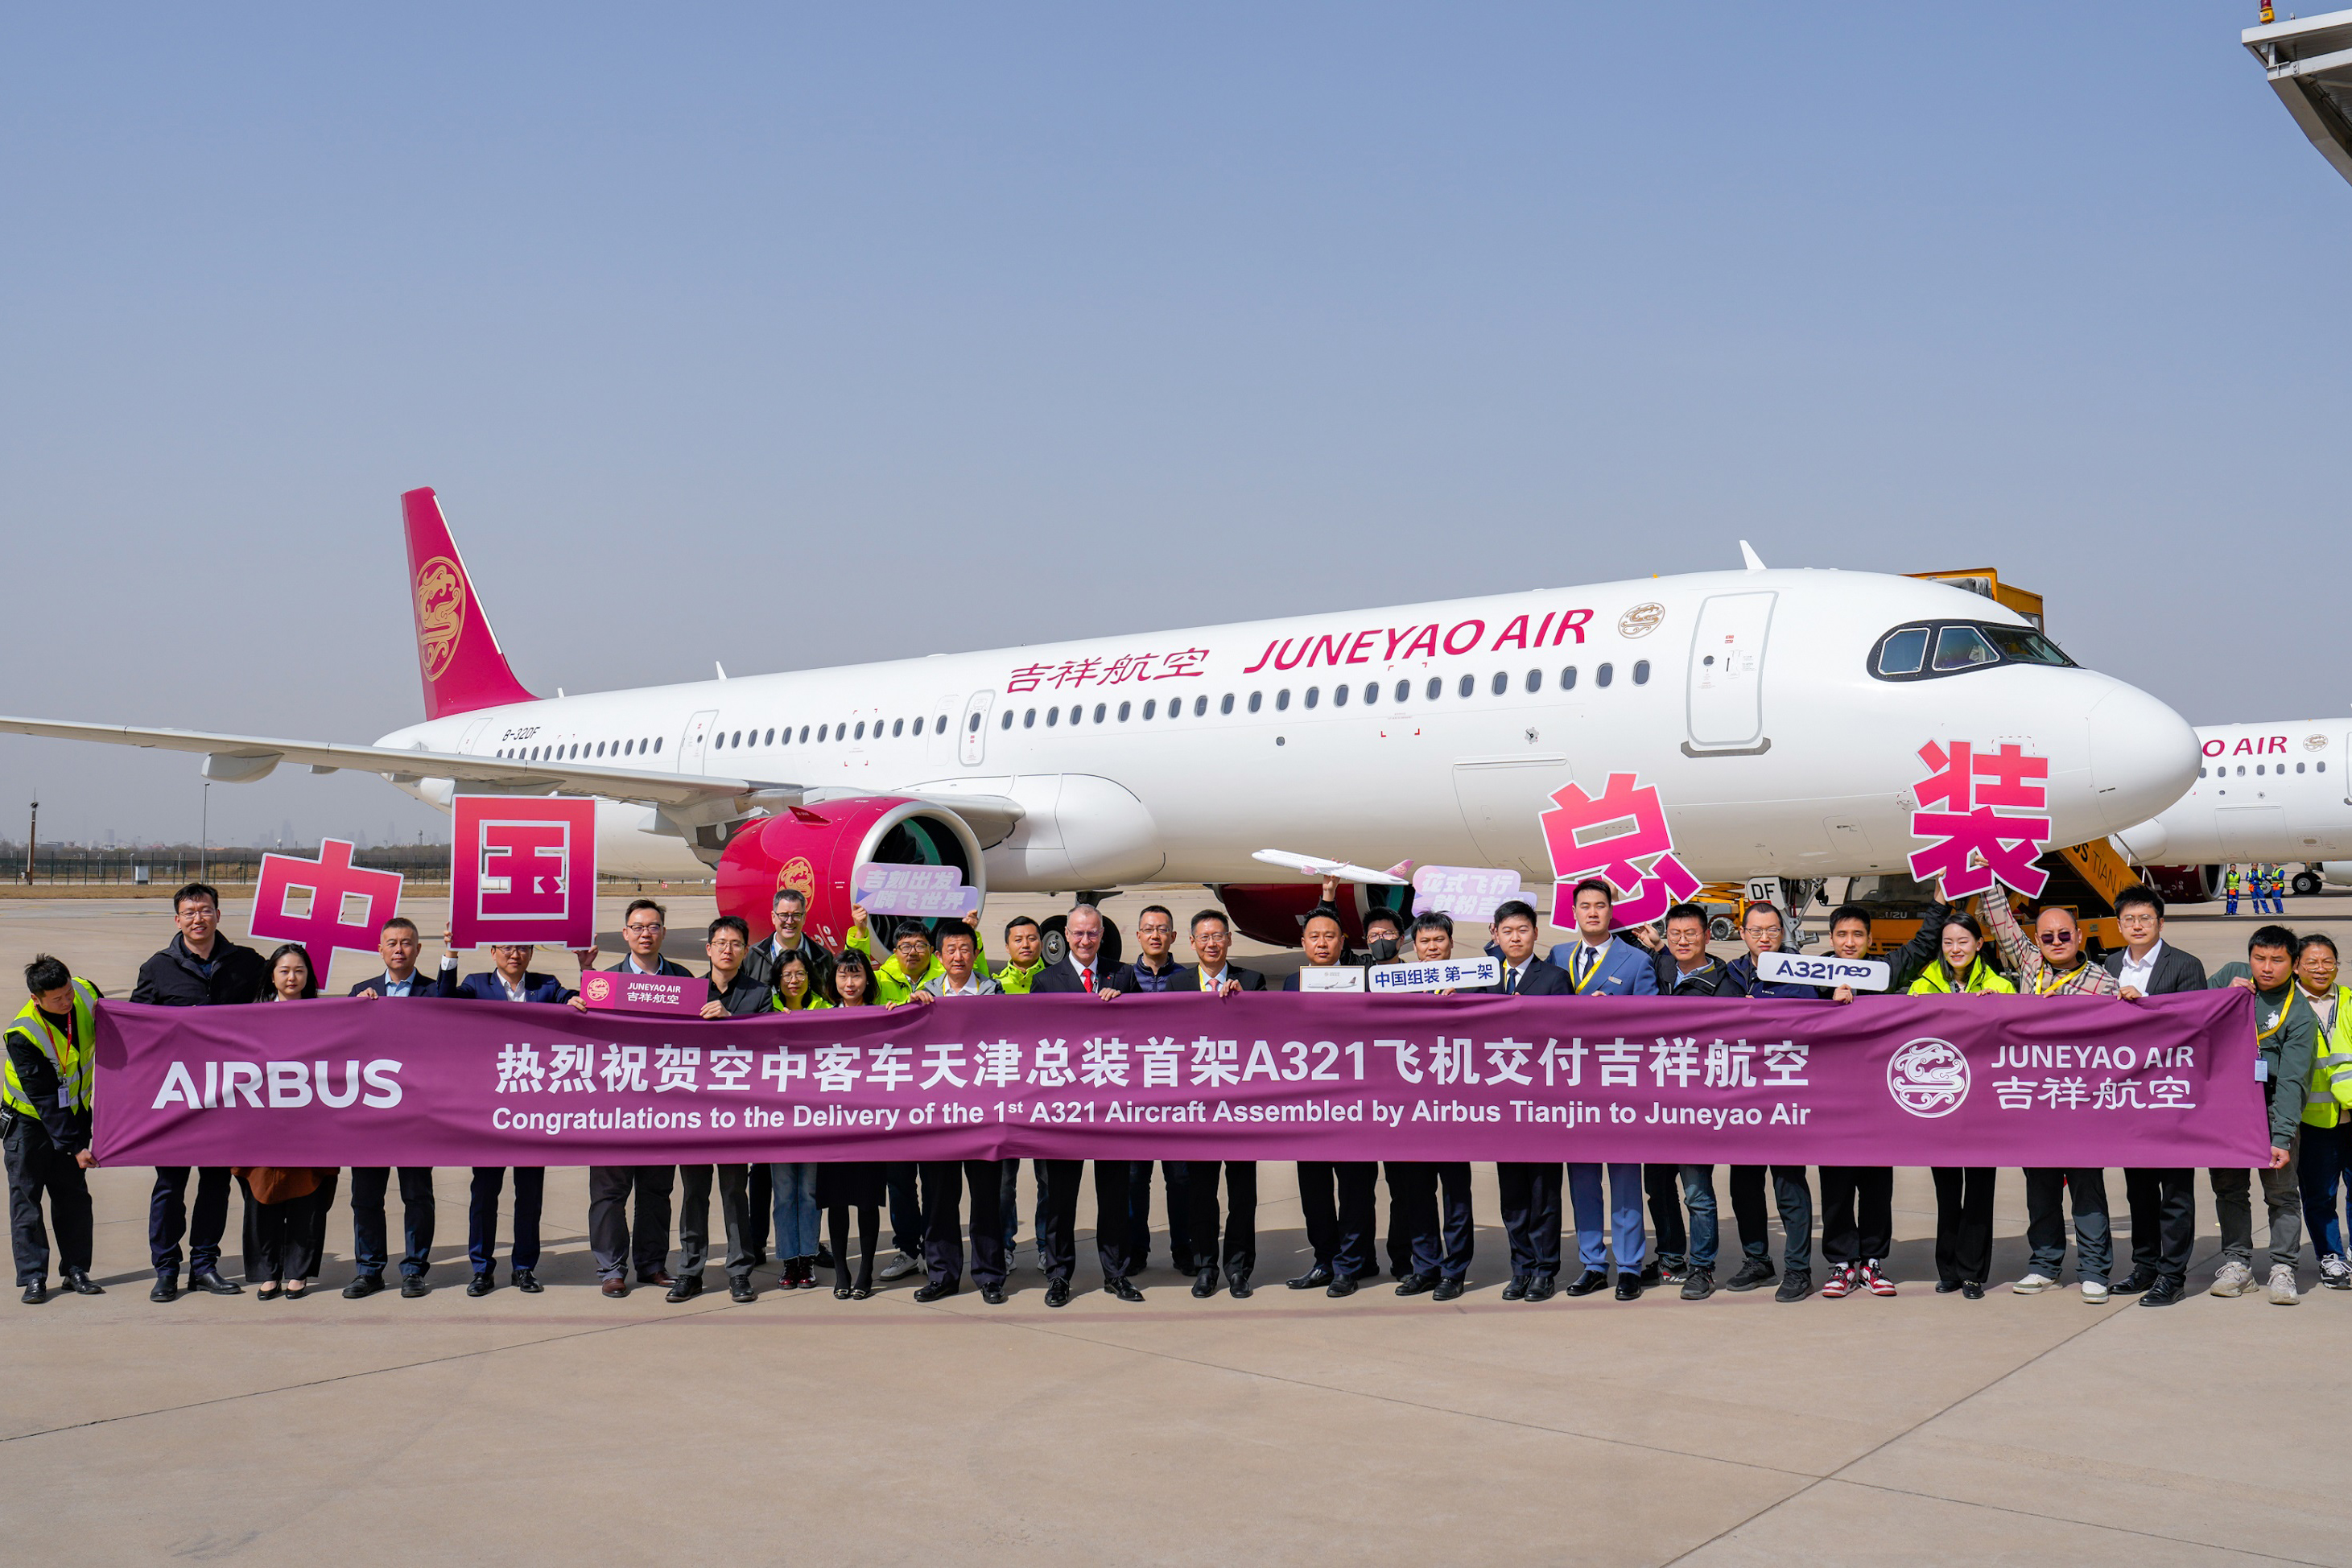 Airbus has delivered the first A321neo aircraft assembled at its Final Assembly Line Asia (FAL Tianjin) to China's Juneyao Air.